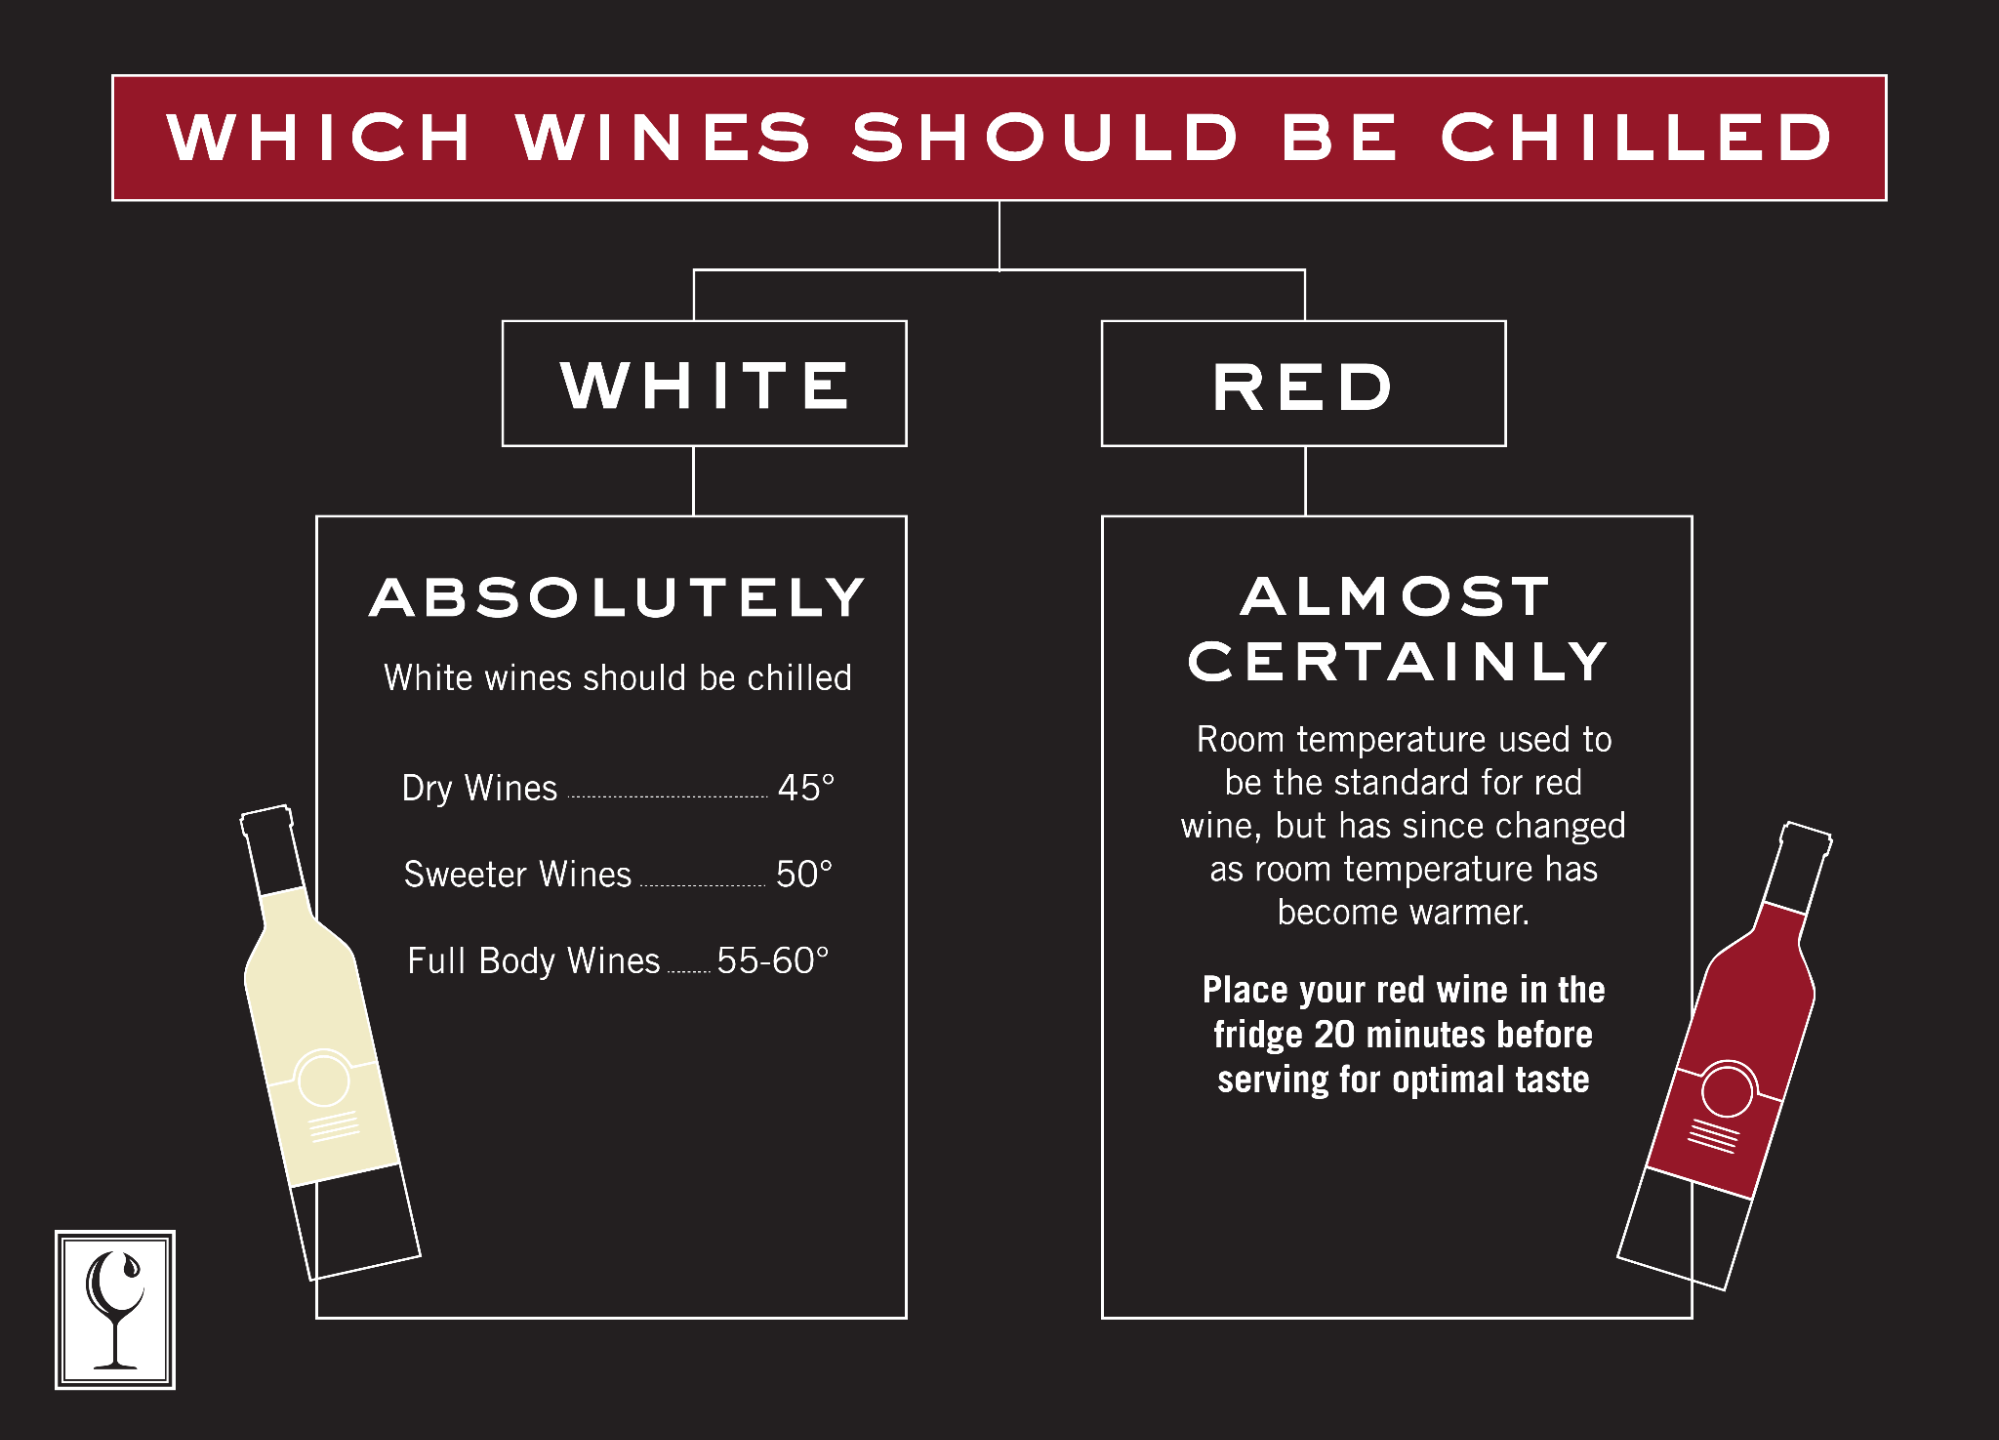 Which wines should be chilled?